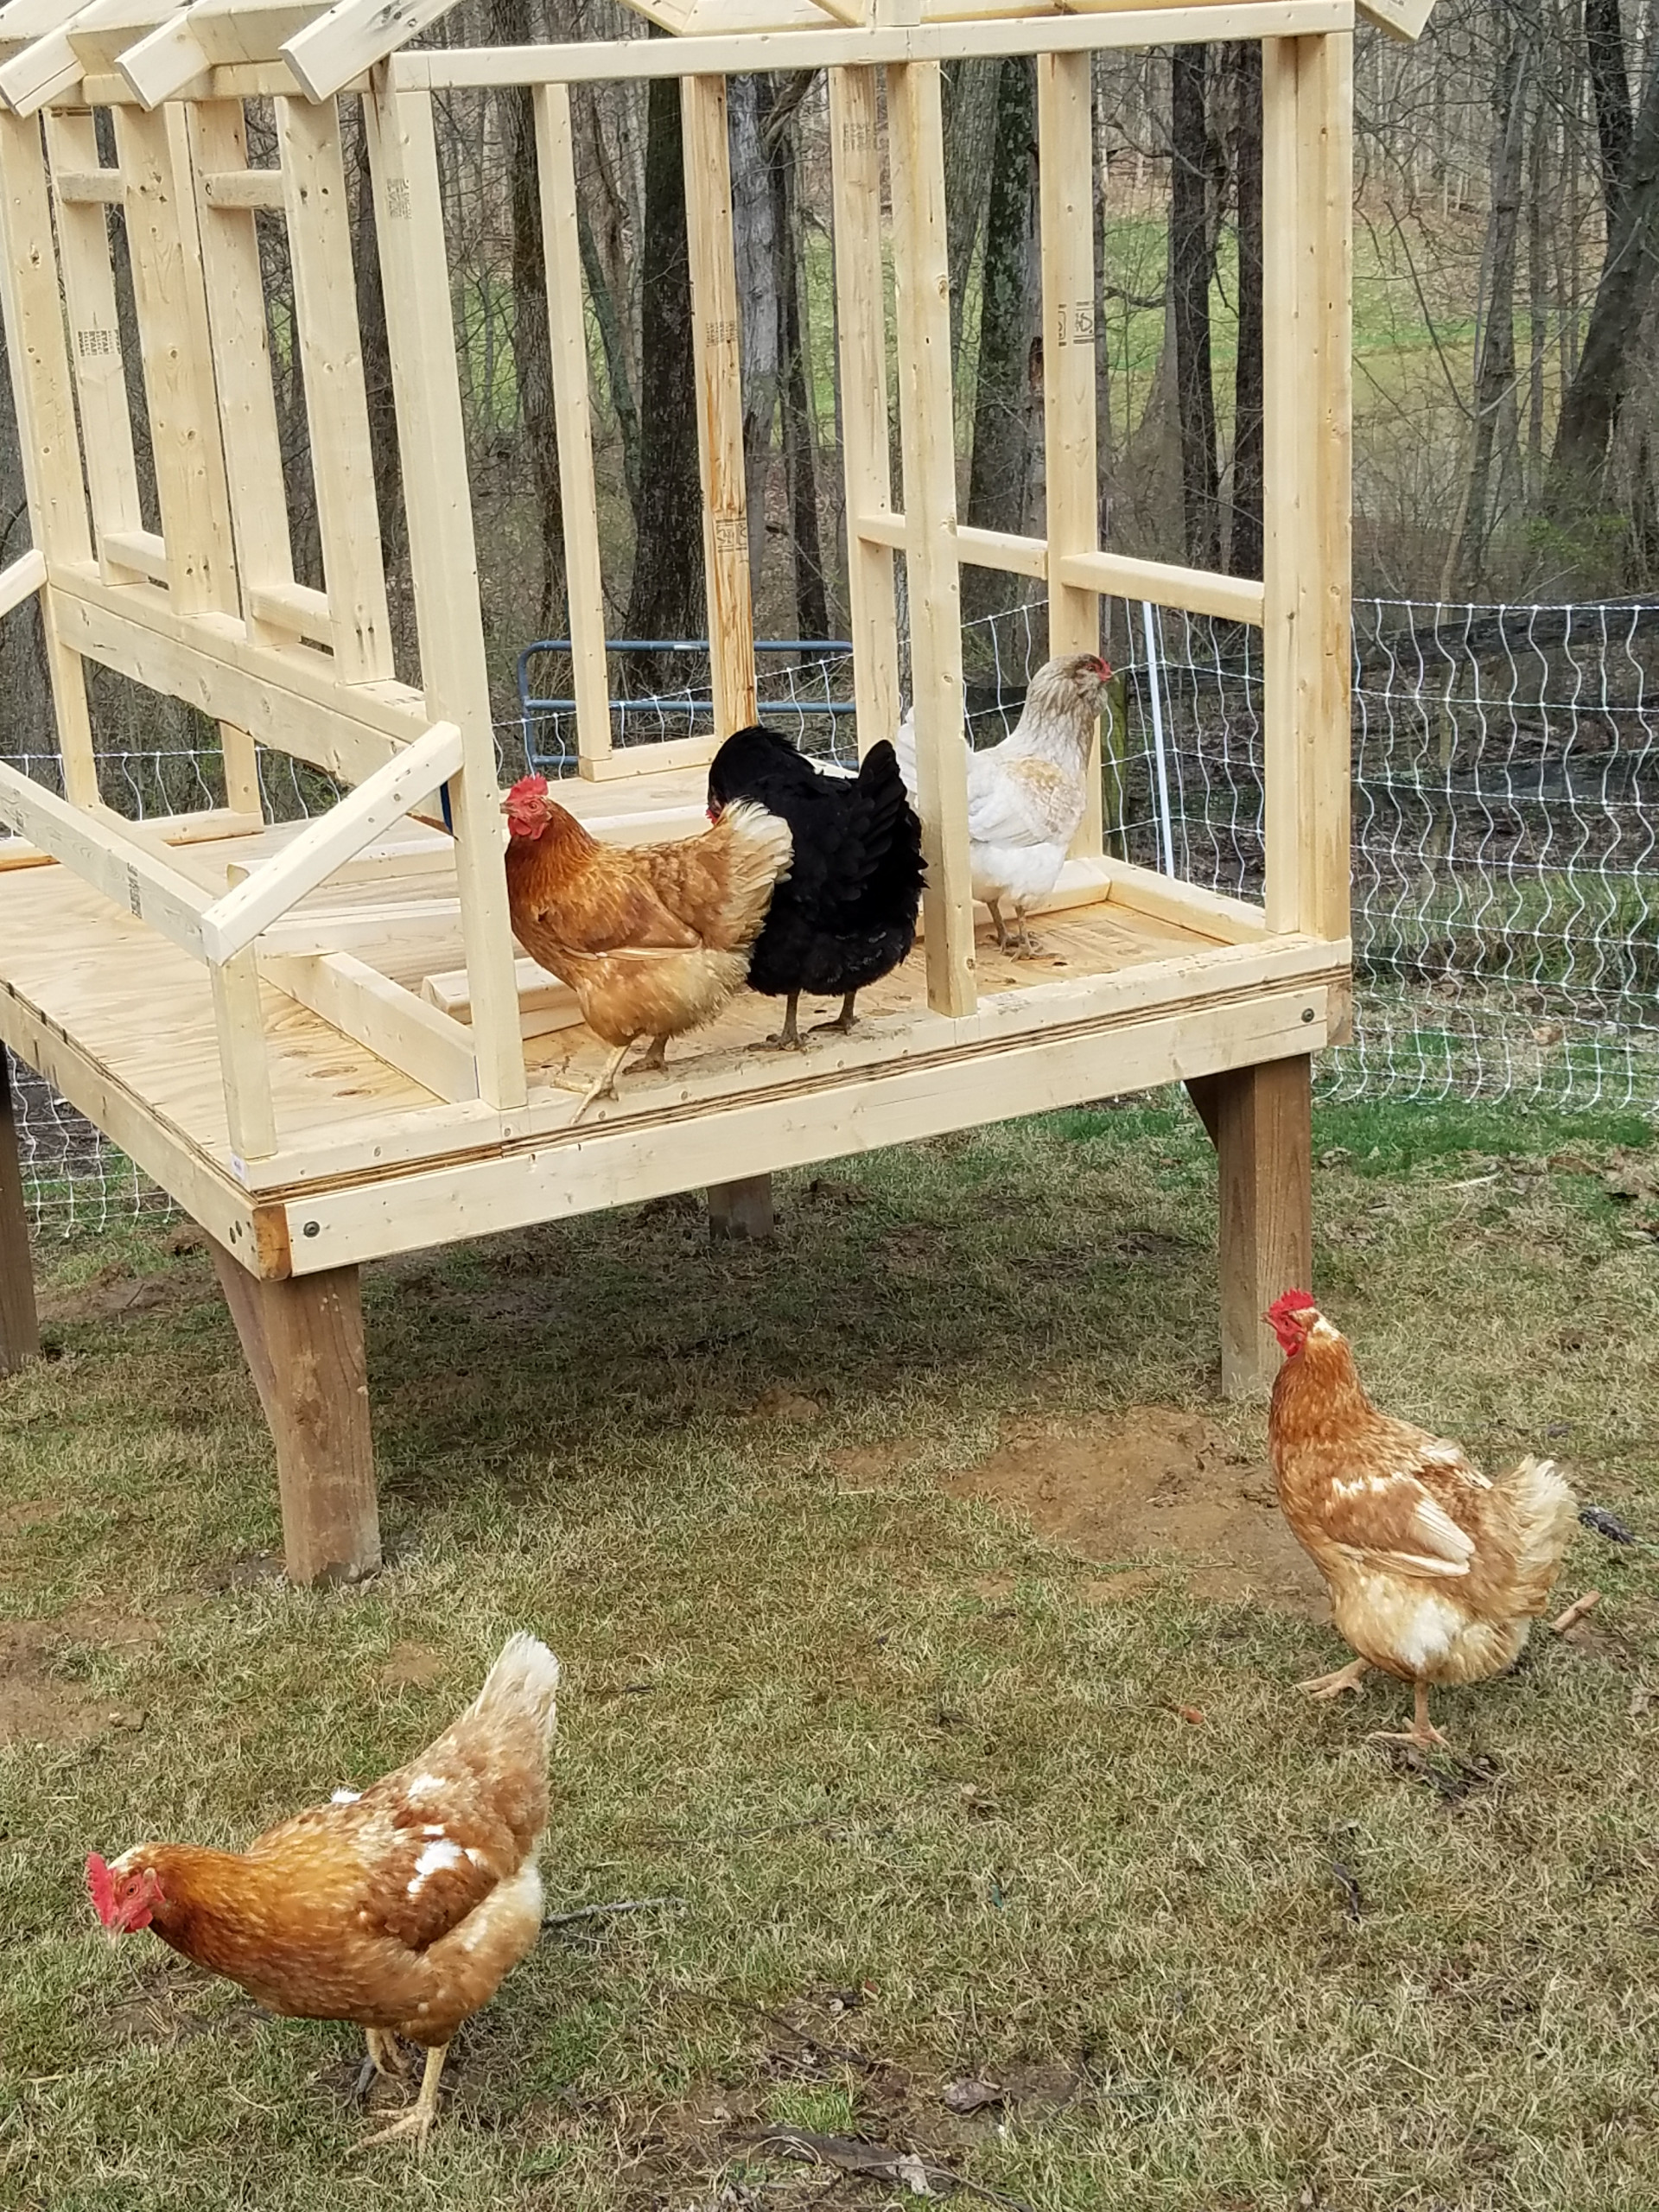 Chickens checking out their new Home being built